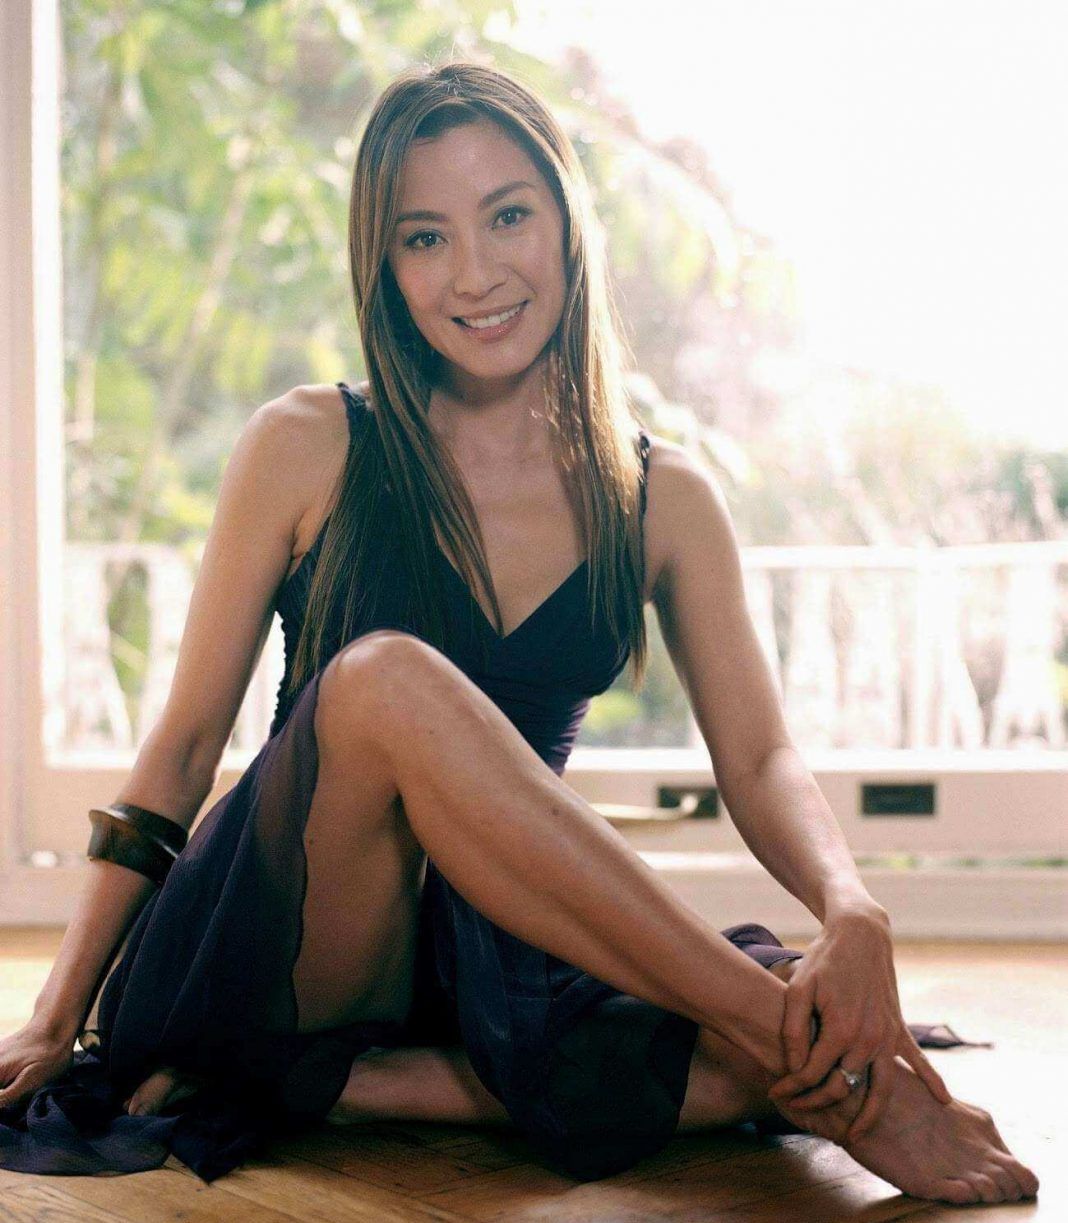 Michelle yeoh topless